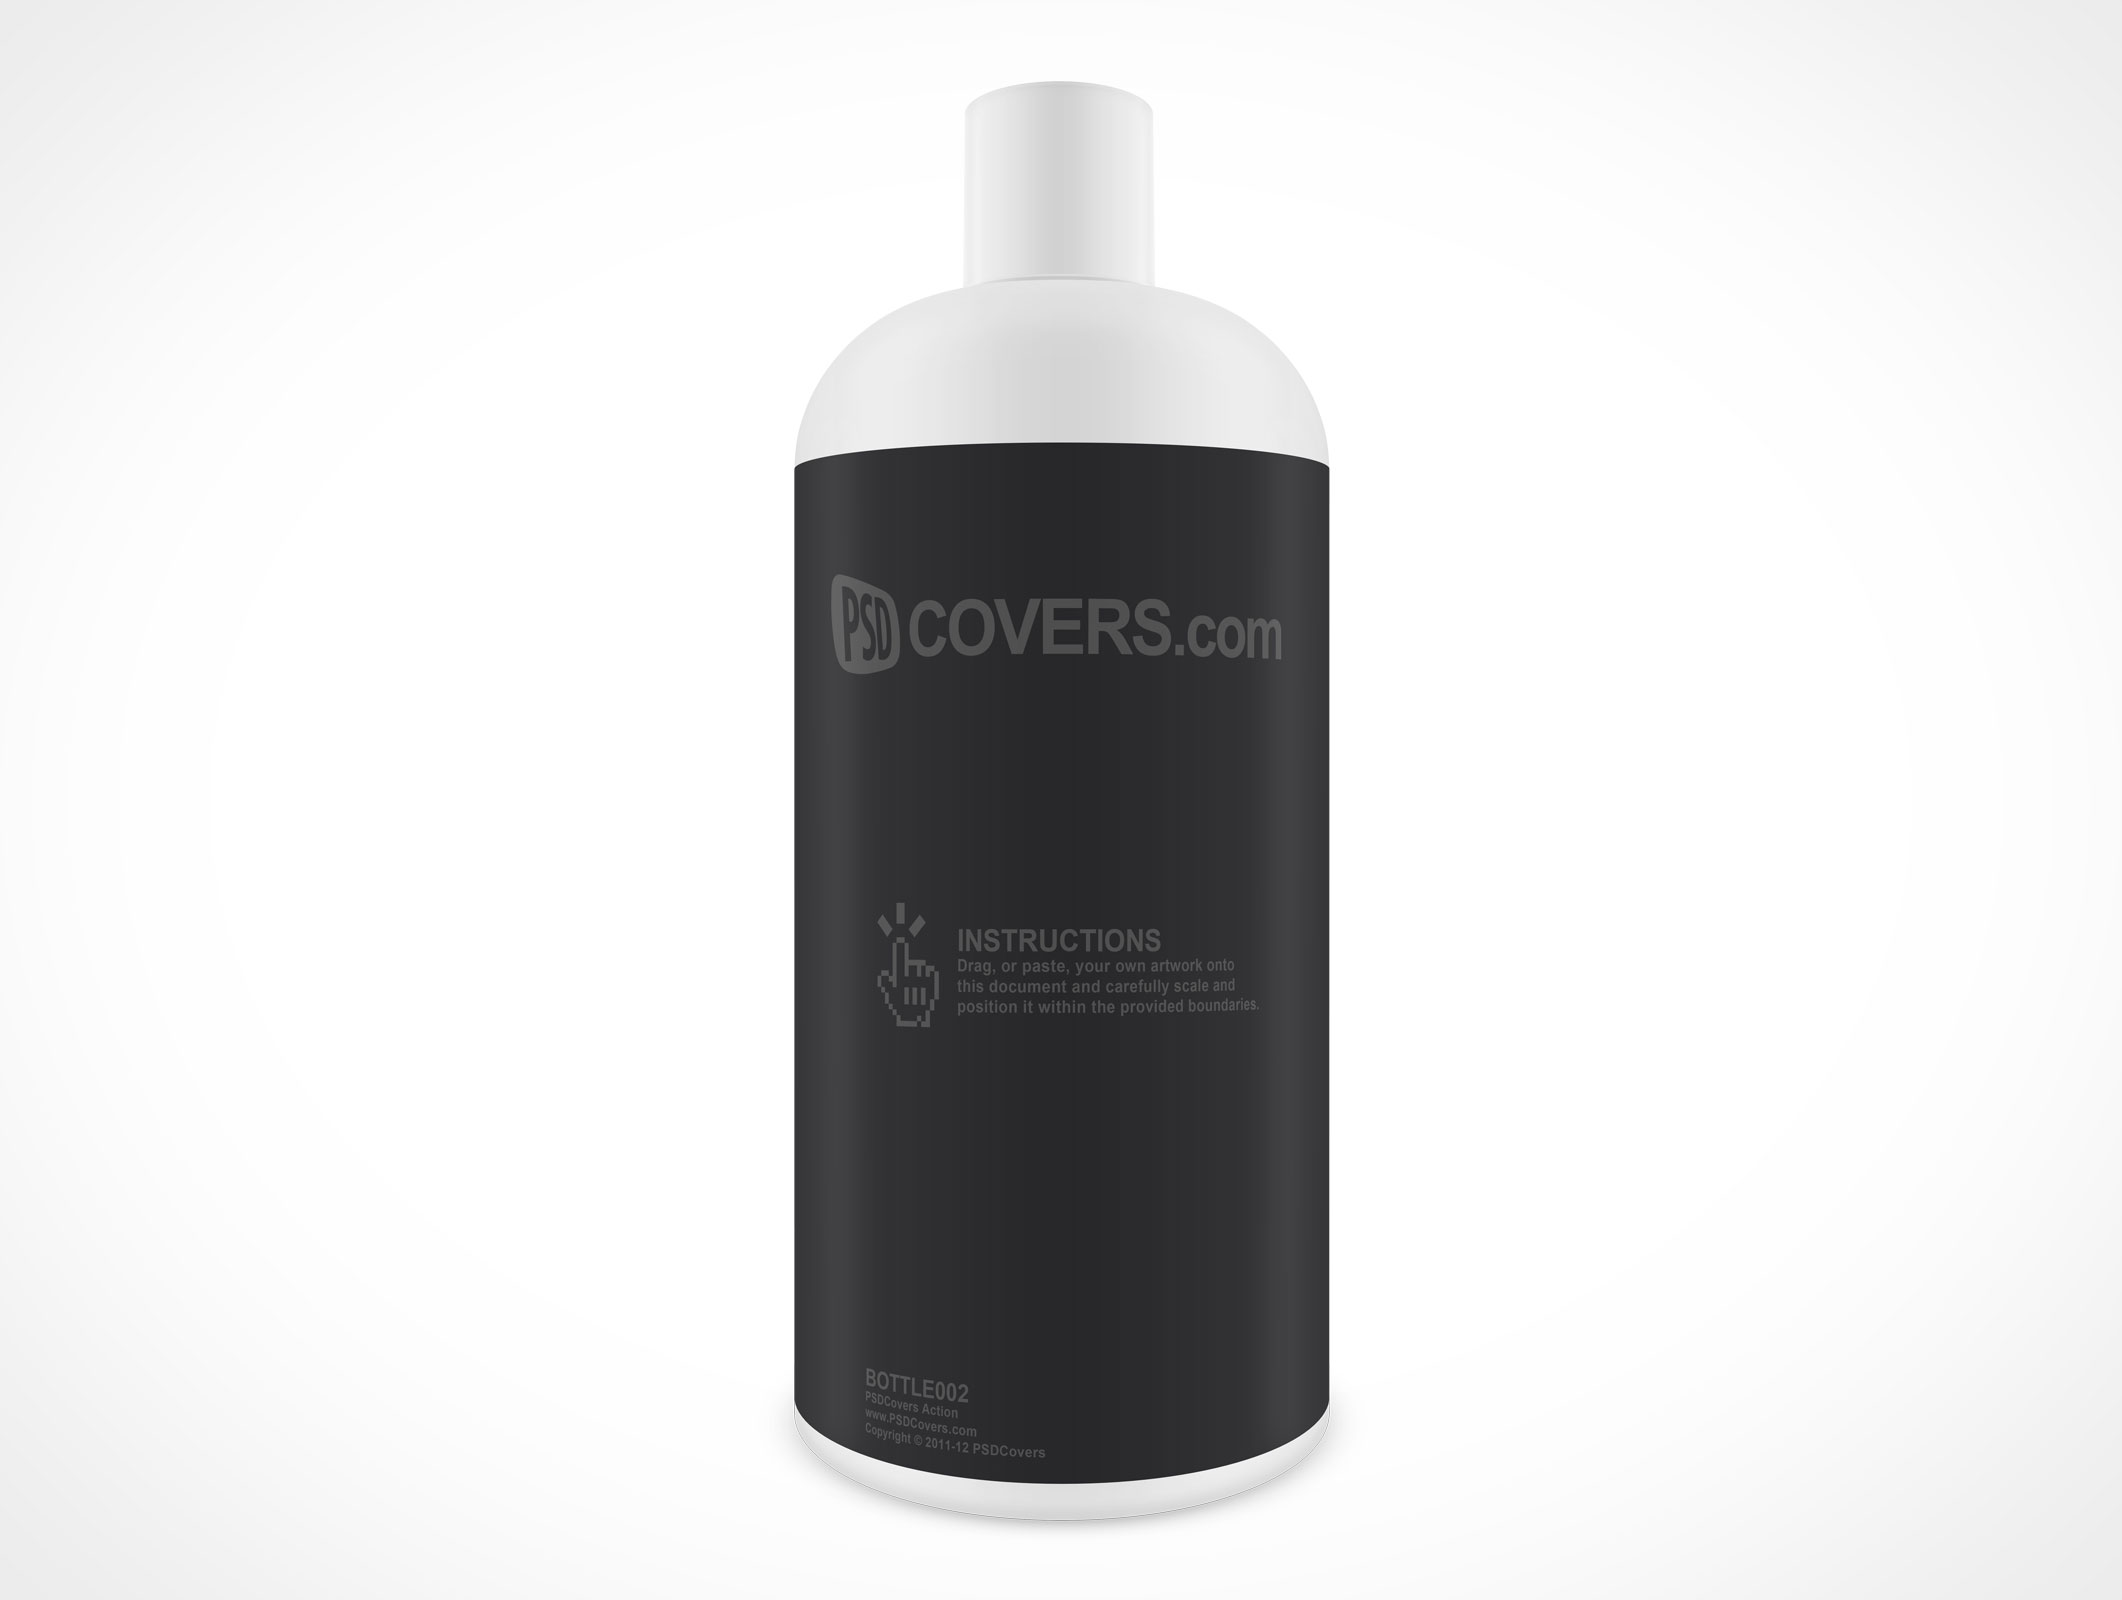 grim Accor muggen Share your brand designs with our Shampoo Bottle Mockup 2